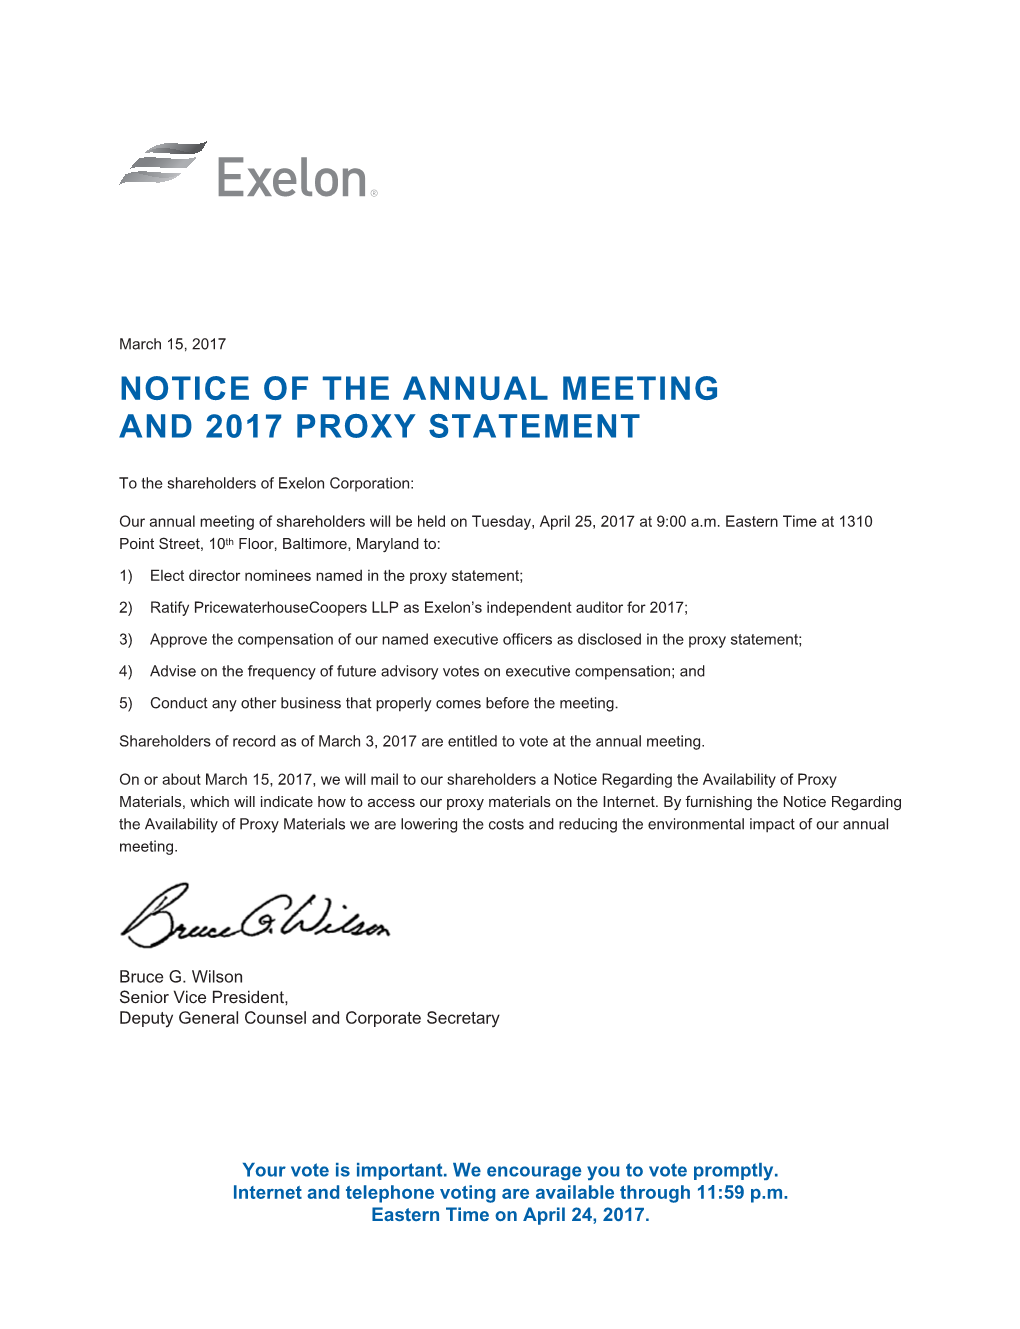 Notice of the Annual Meeting and 2017 Proxy Statement